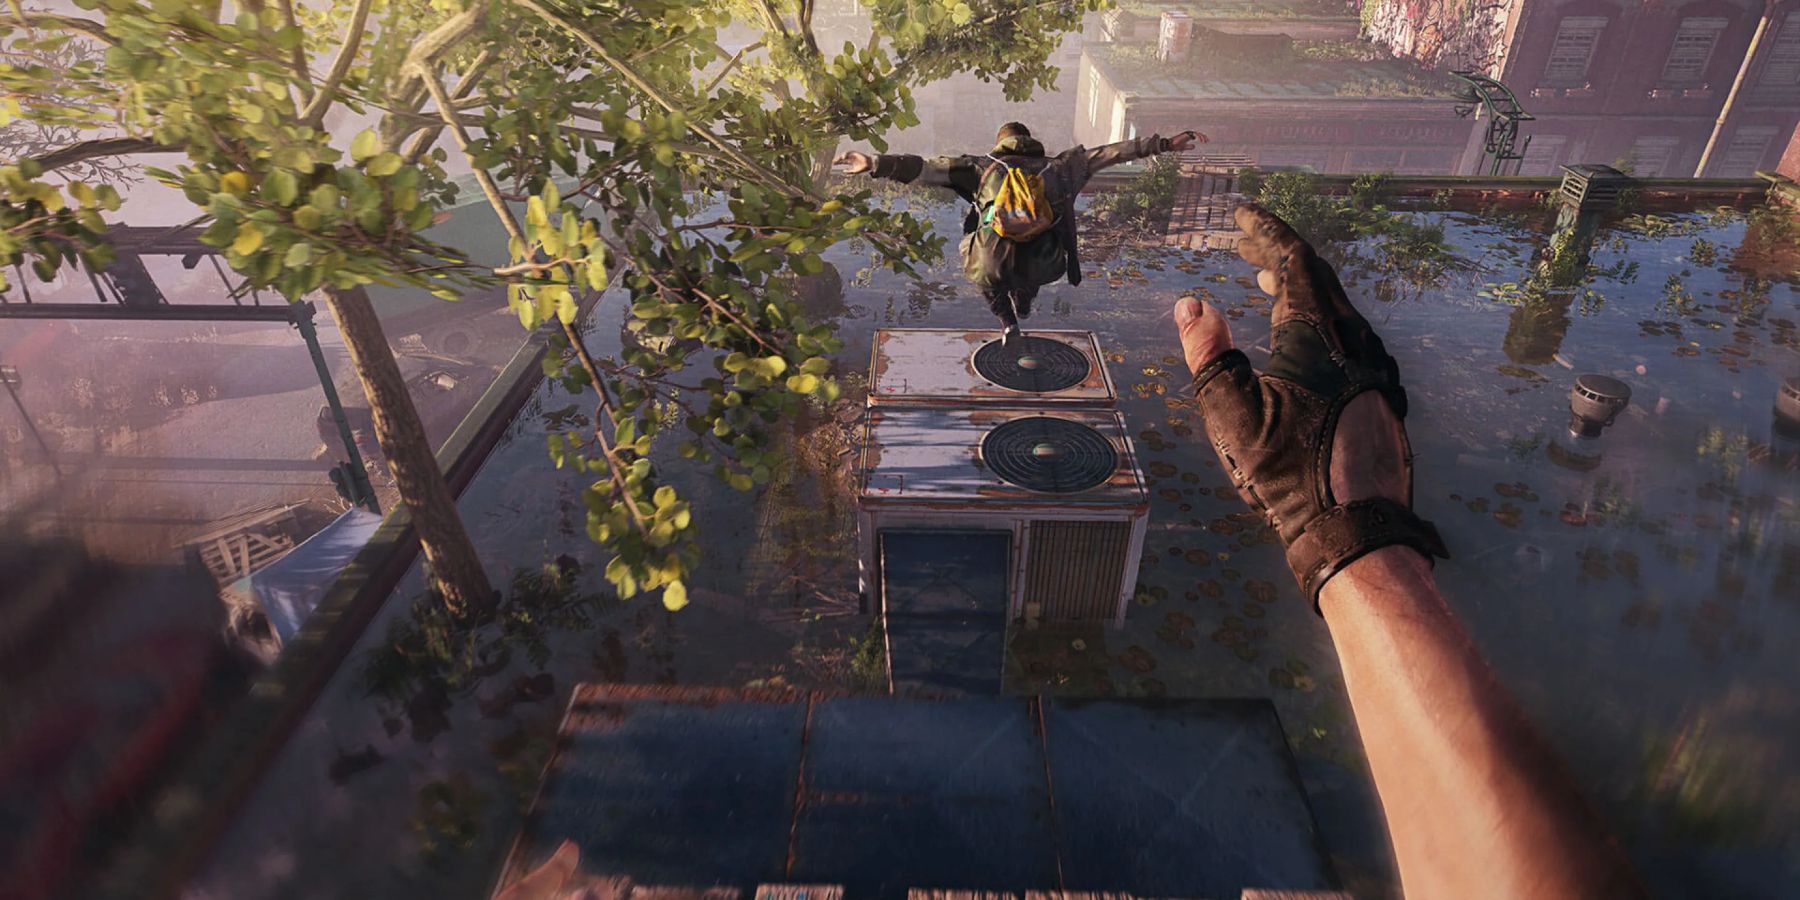 Screenshot from Dying Light 2 showing the player doing parkour behind another player.